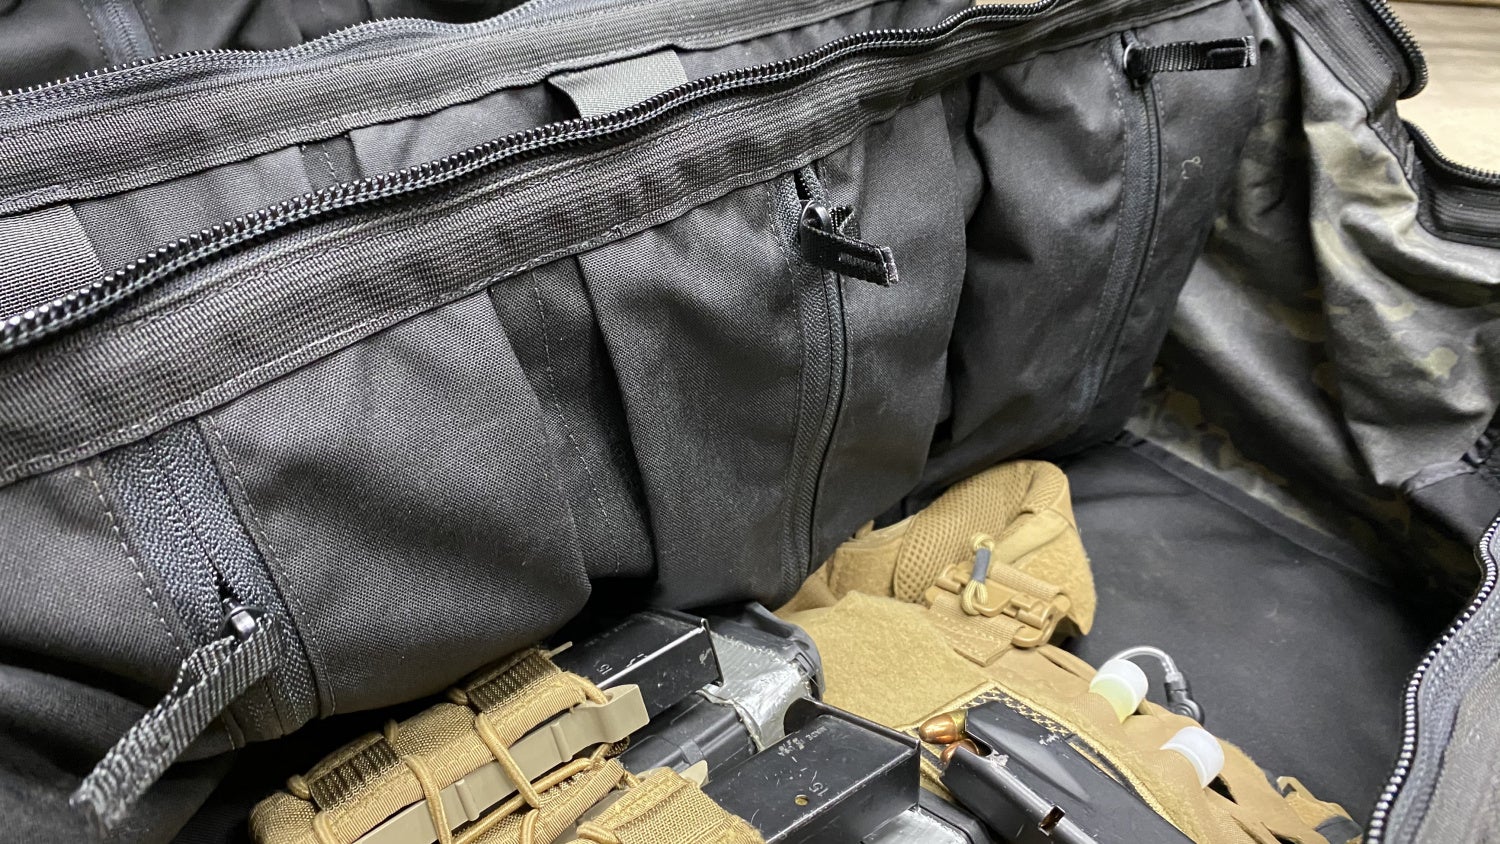 Sentry Range Bag Review: [Field Tested]